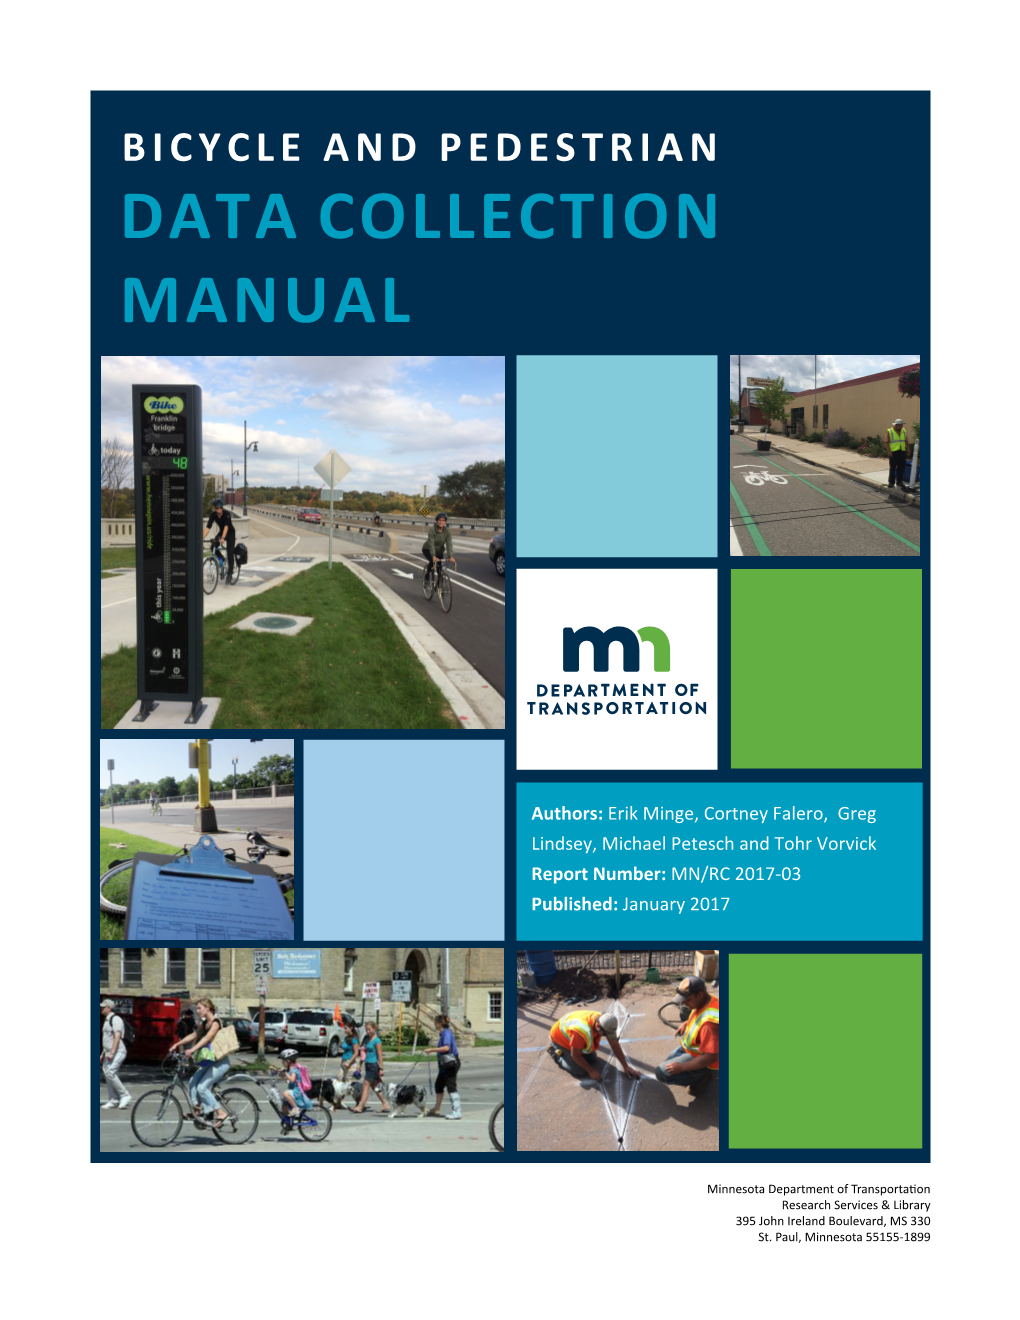 Minnesota's Bicycle and Pedestrian Data Collection Manual